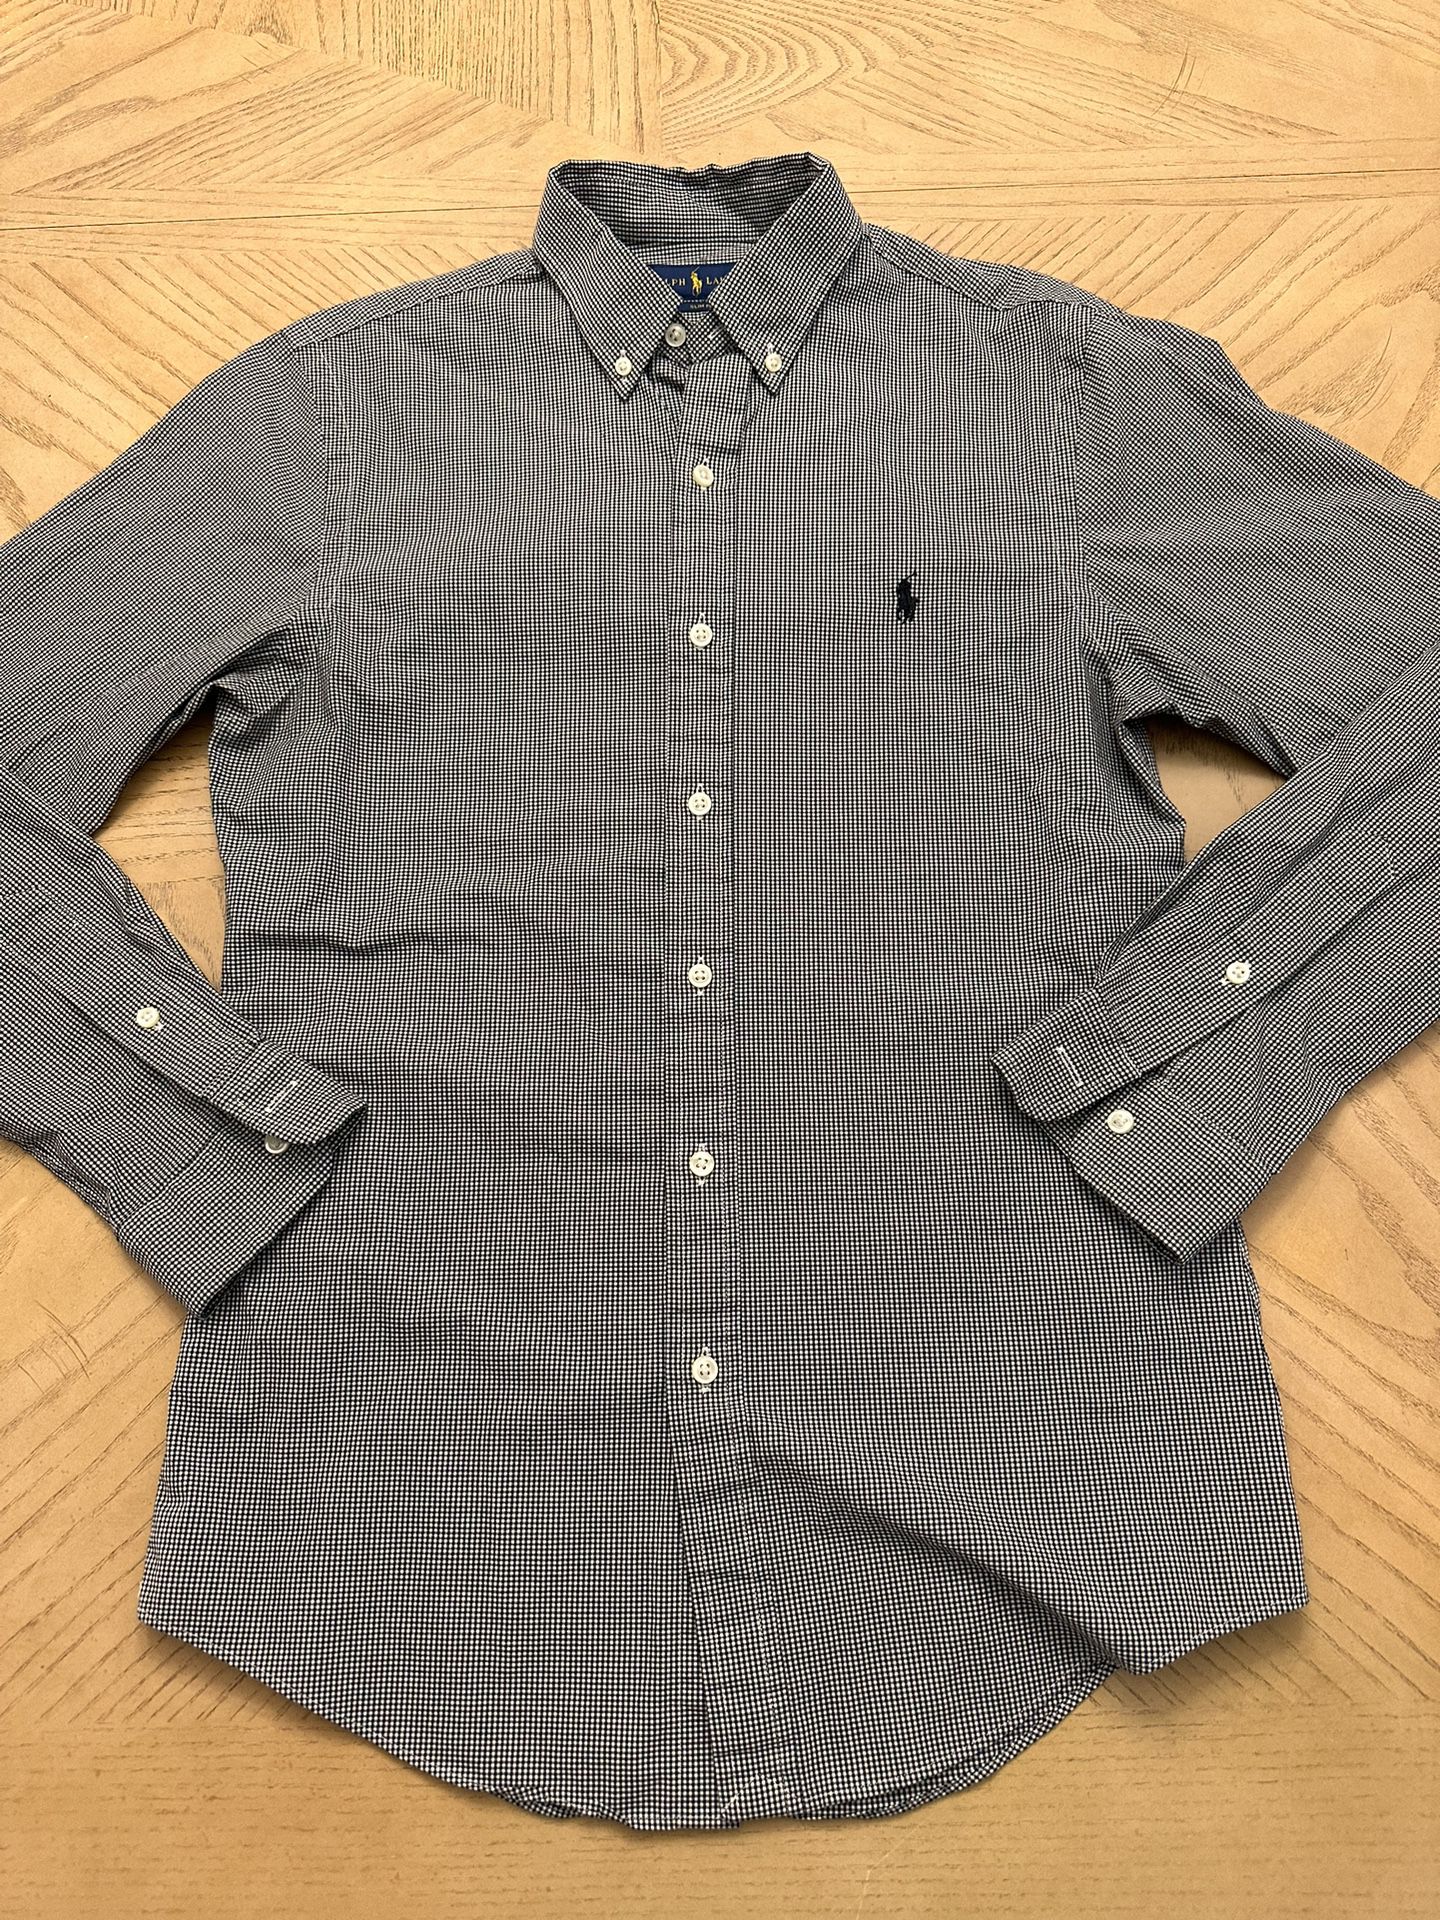 Ralph Lauren Classic Pony Long Sleeve  Blue/gray//Whites Check Button Shirt slim fit Size small 